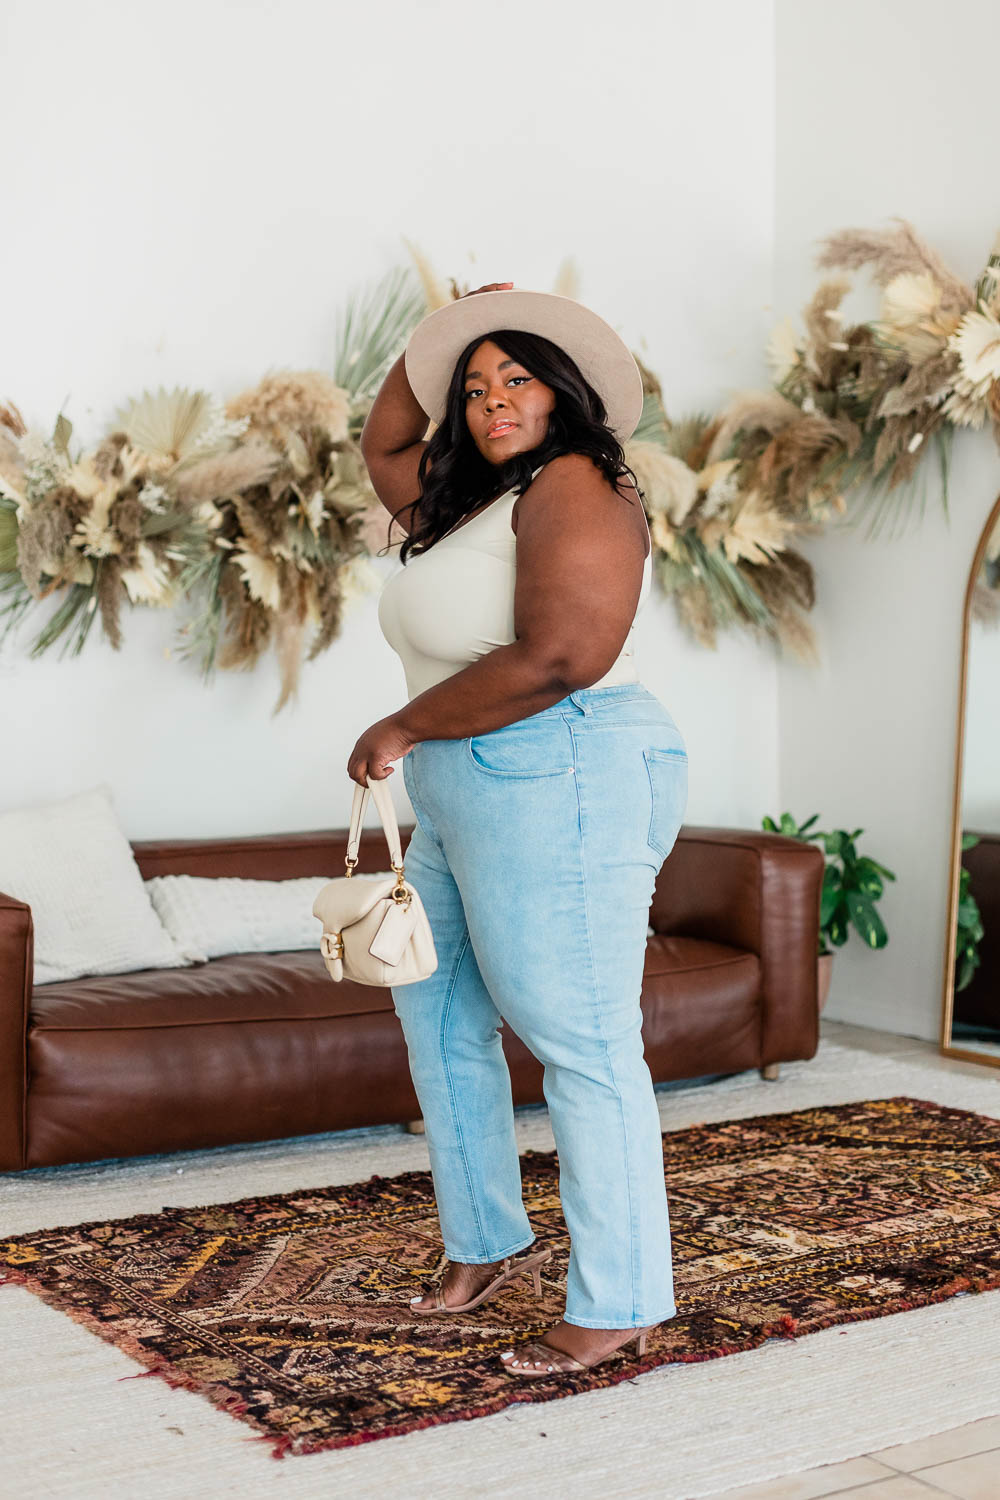 Forever 21 Plus Size Knit Bodysuit Tan, Forever 21 Plus Size Straight Leg Jean, Lack of Color Benson Tri-Beige, Dumplin Bag, Organic Cotton Graphic Tee Forever 21 Plus Size Be a Good Human, Dried Flower Installation, Urban Outfitters Tabitha Arc Mirror